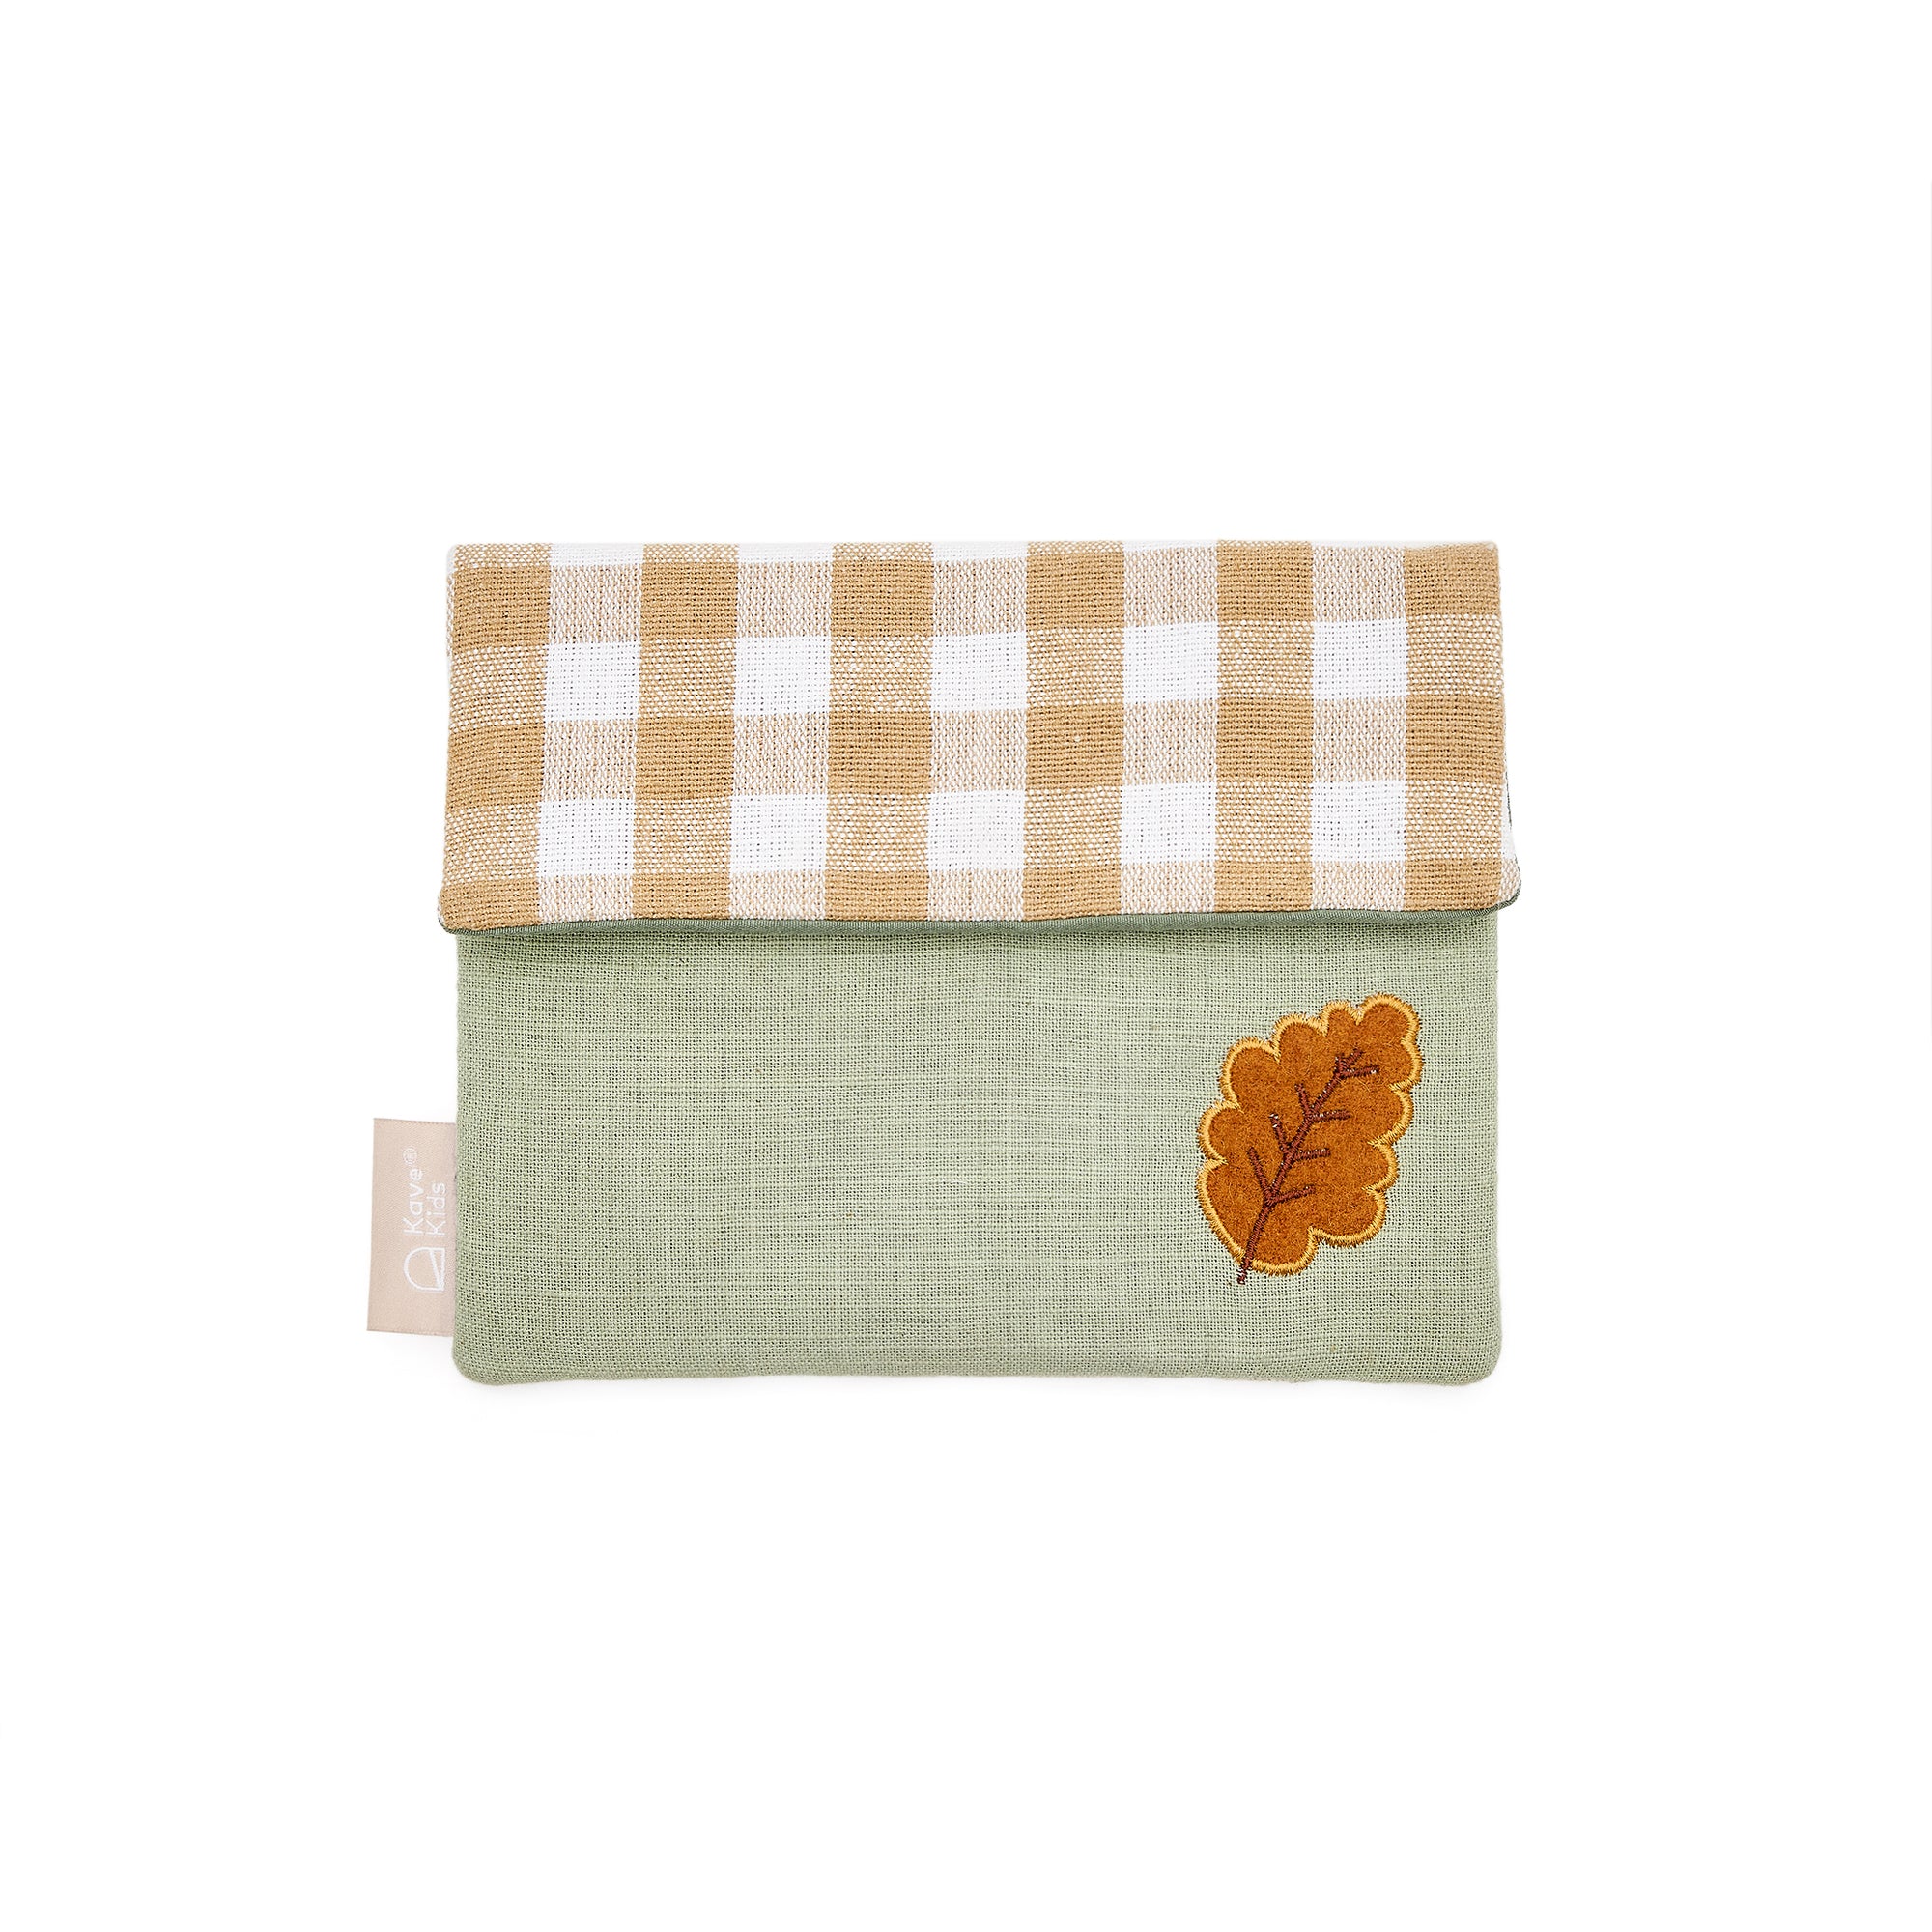 Yanil green vichy check Yanil case with embroidered leaf